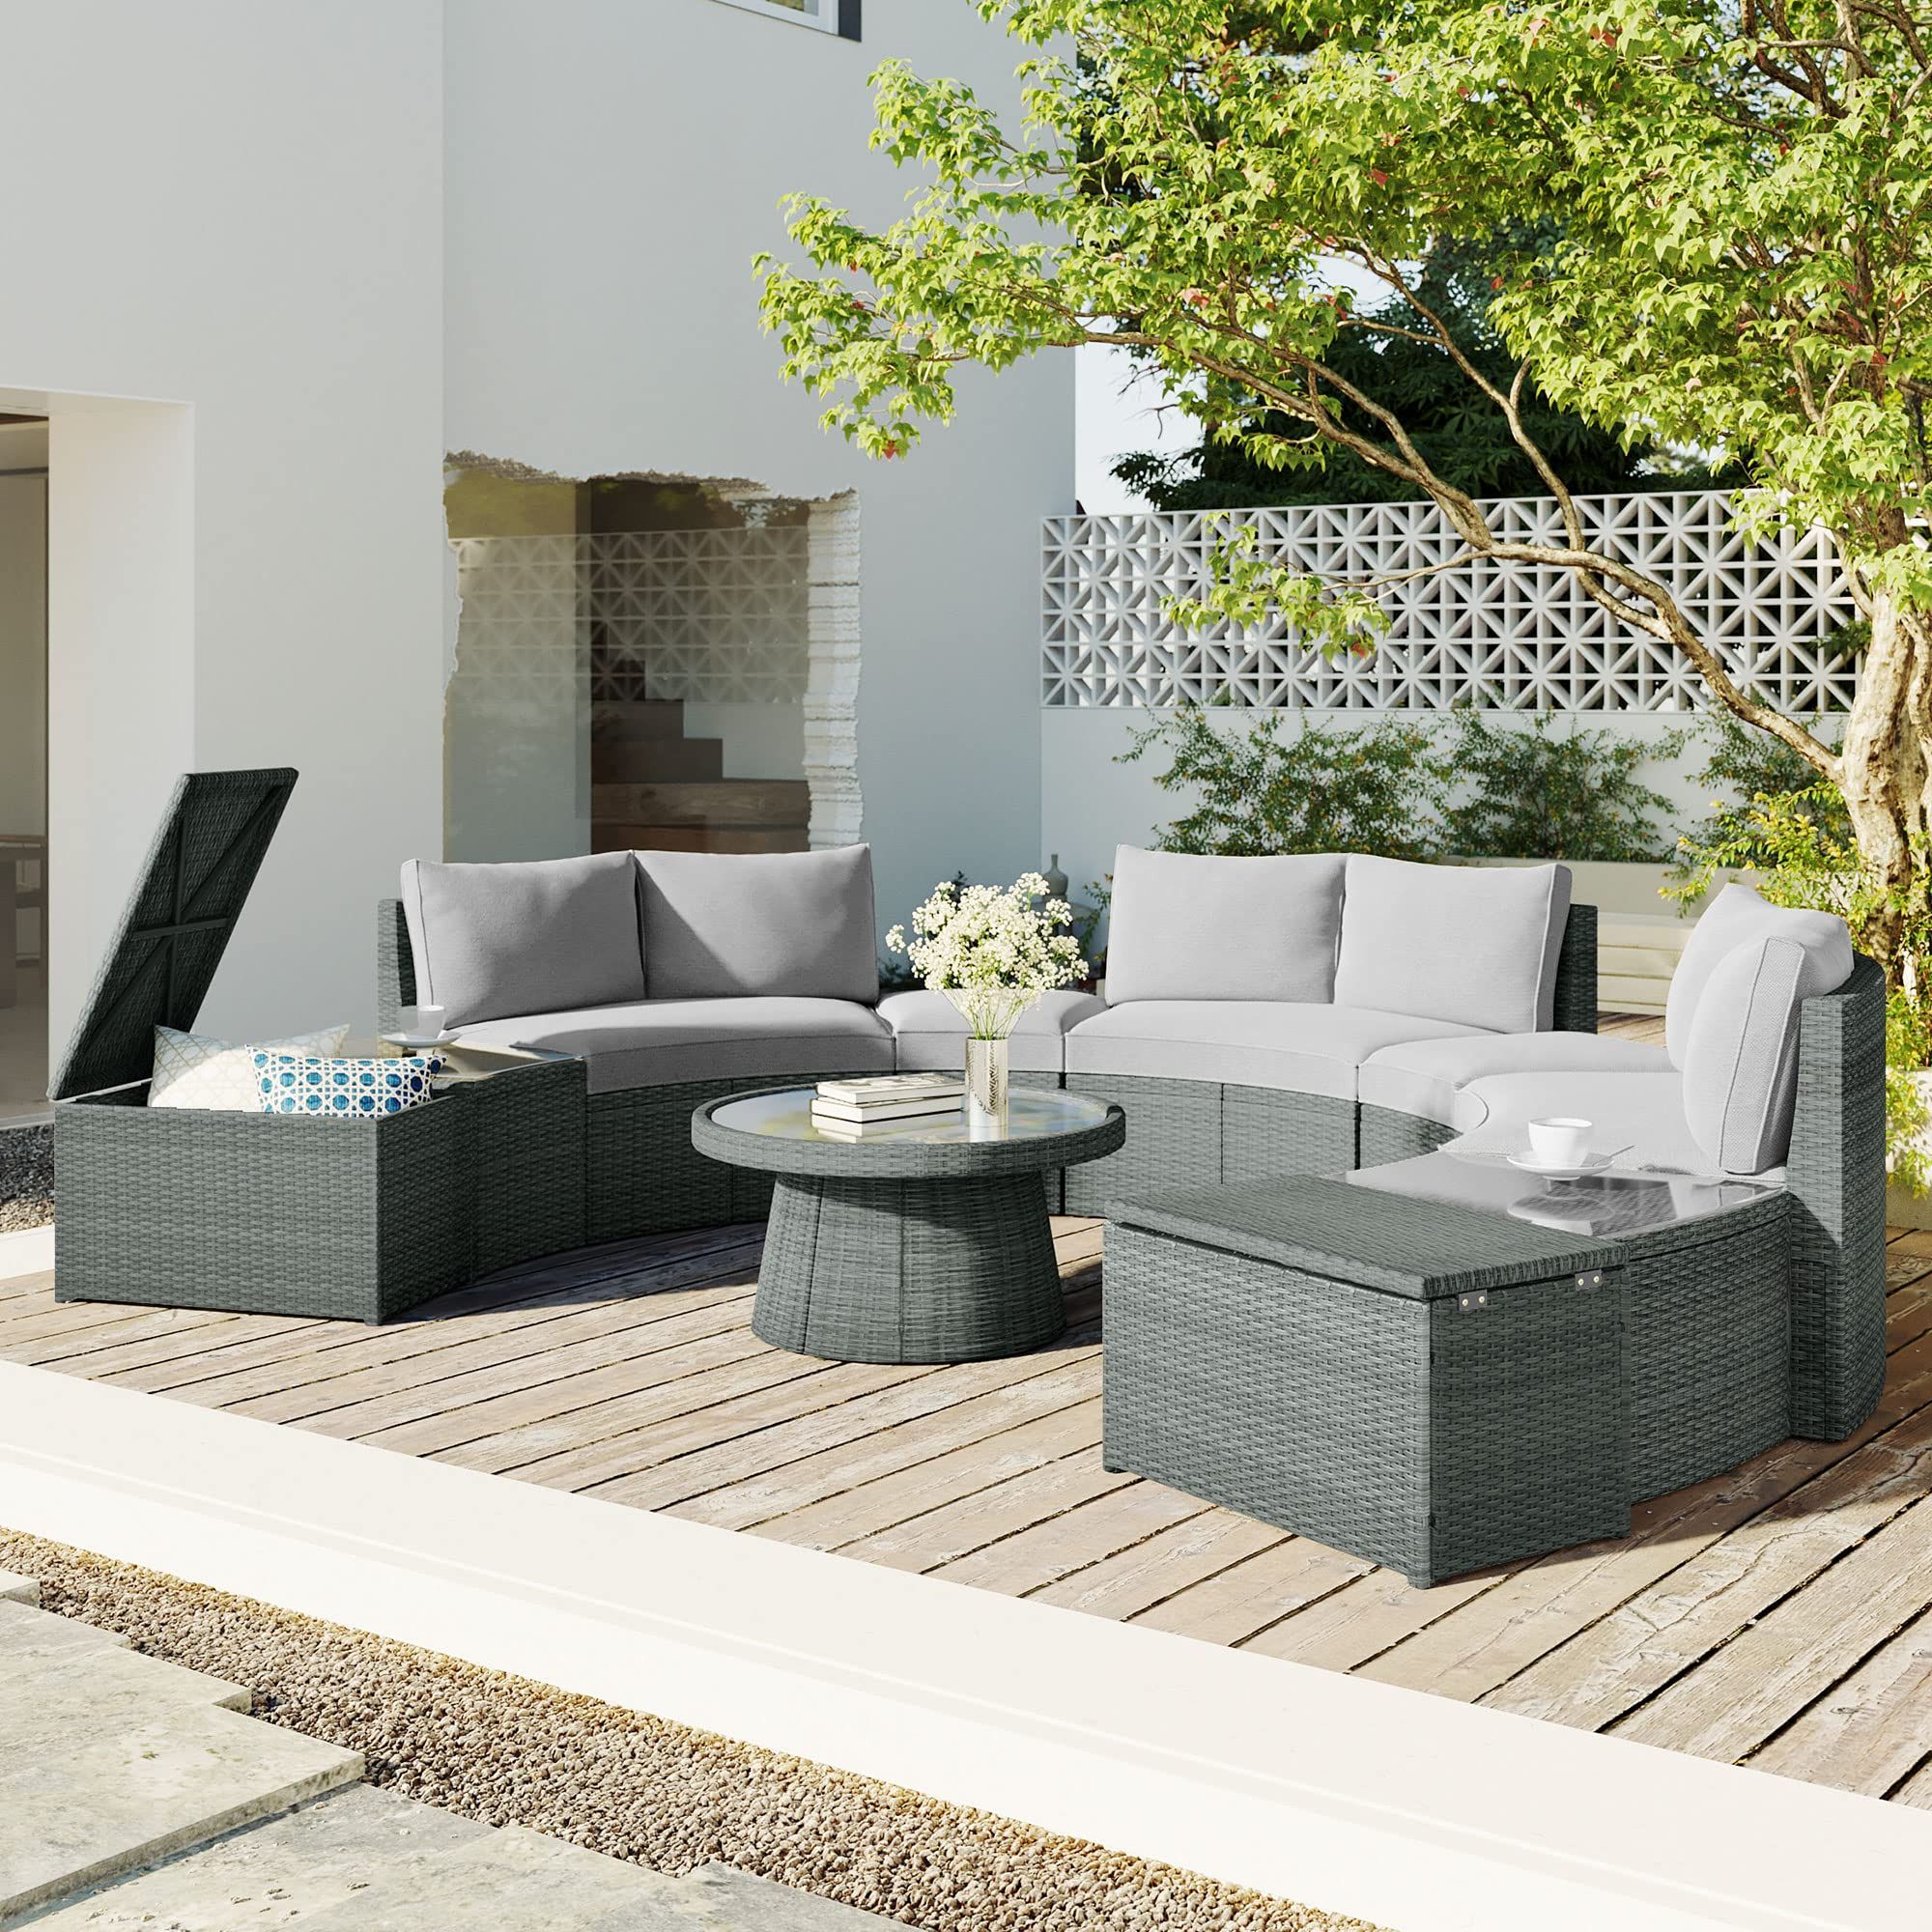 Amazon: Yswh 10 Piece Outdoor Half Moon Sofa Set, Rattan Patio  Furniture Half Round Sofa Set With Round Table And Storage Stools,  Sectional Conversational Sofa Set For Free Combination : Patio, Lawn & Pertaining To Trendy Outdoor Half Round Coffee Tables (Photo 3 of 10)